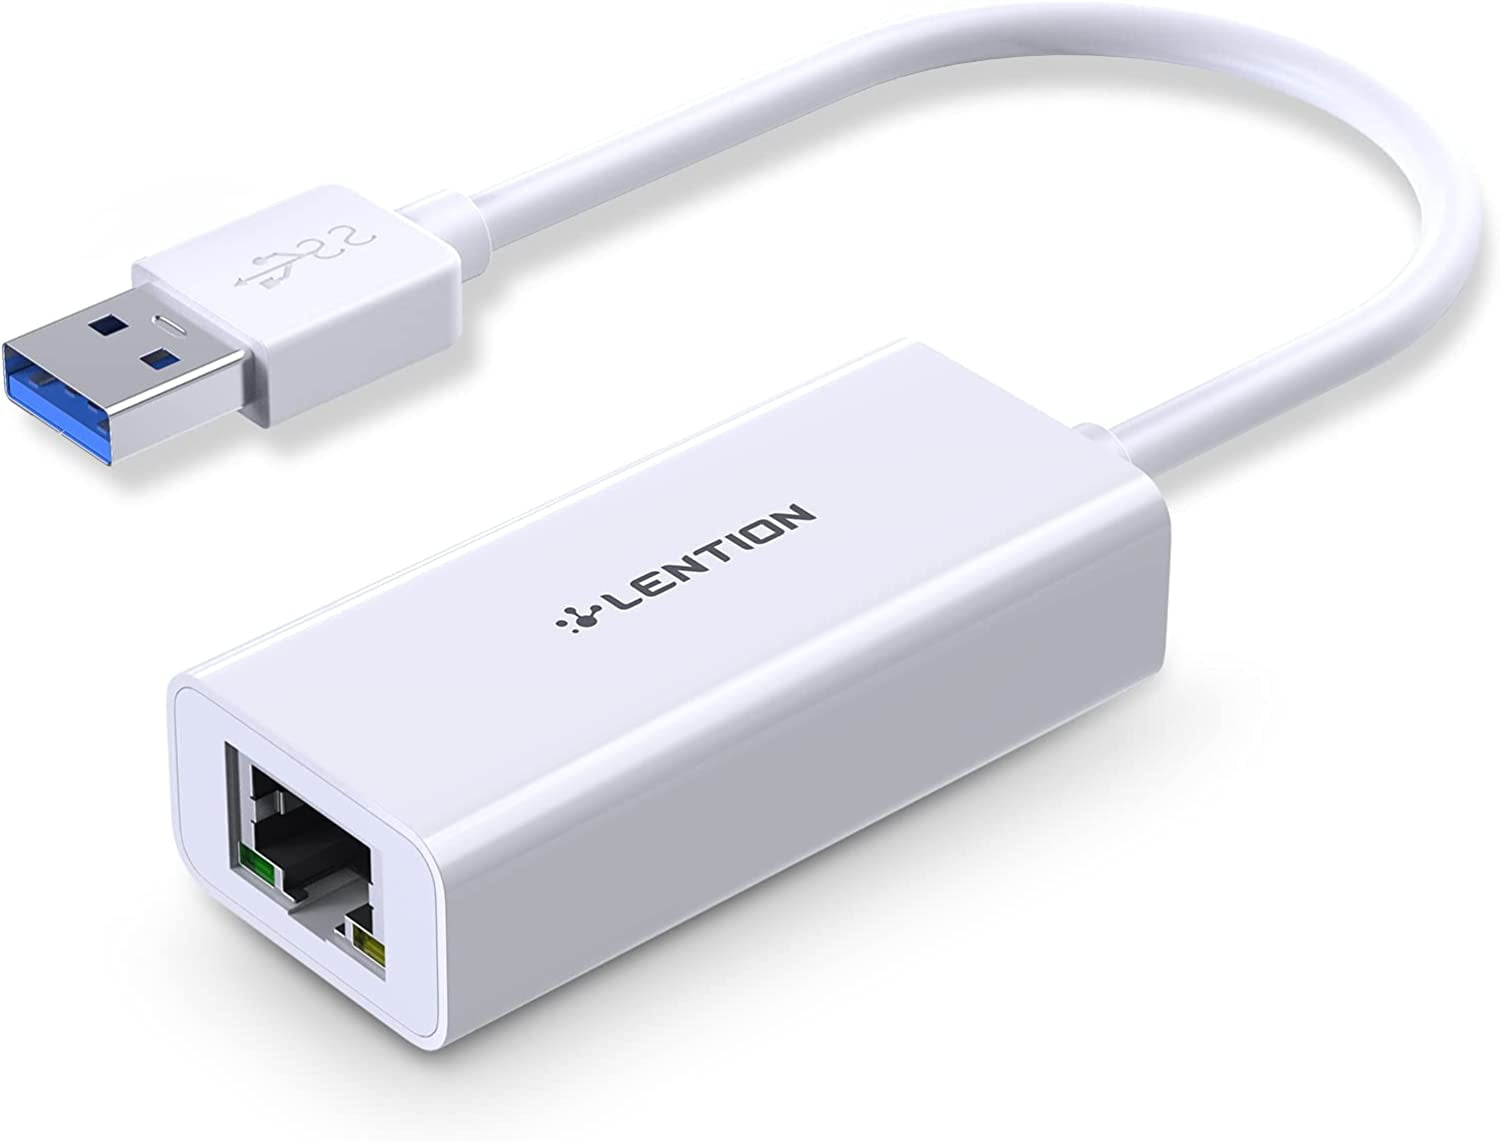 maximize kapok Children Center LENTION USB 3.0 Type A to Gigabit Ethernet Adapter,USB A to 1000M RJ45  Wired LAN Network Connector Compatible with Nintendo Switch,Mac  OS,Windows,Linux(HU404GE,White) - Walmart.com